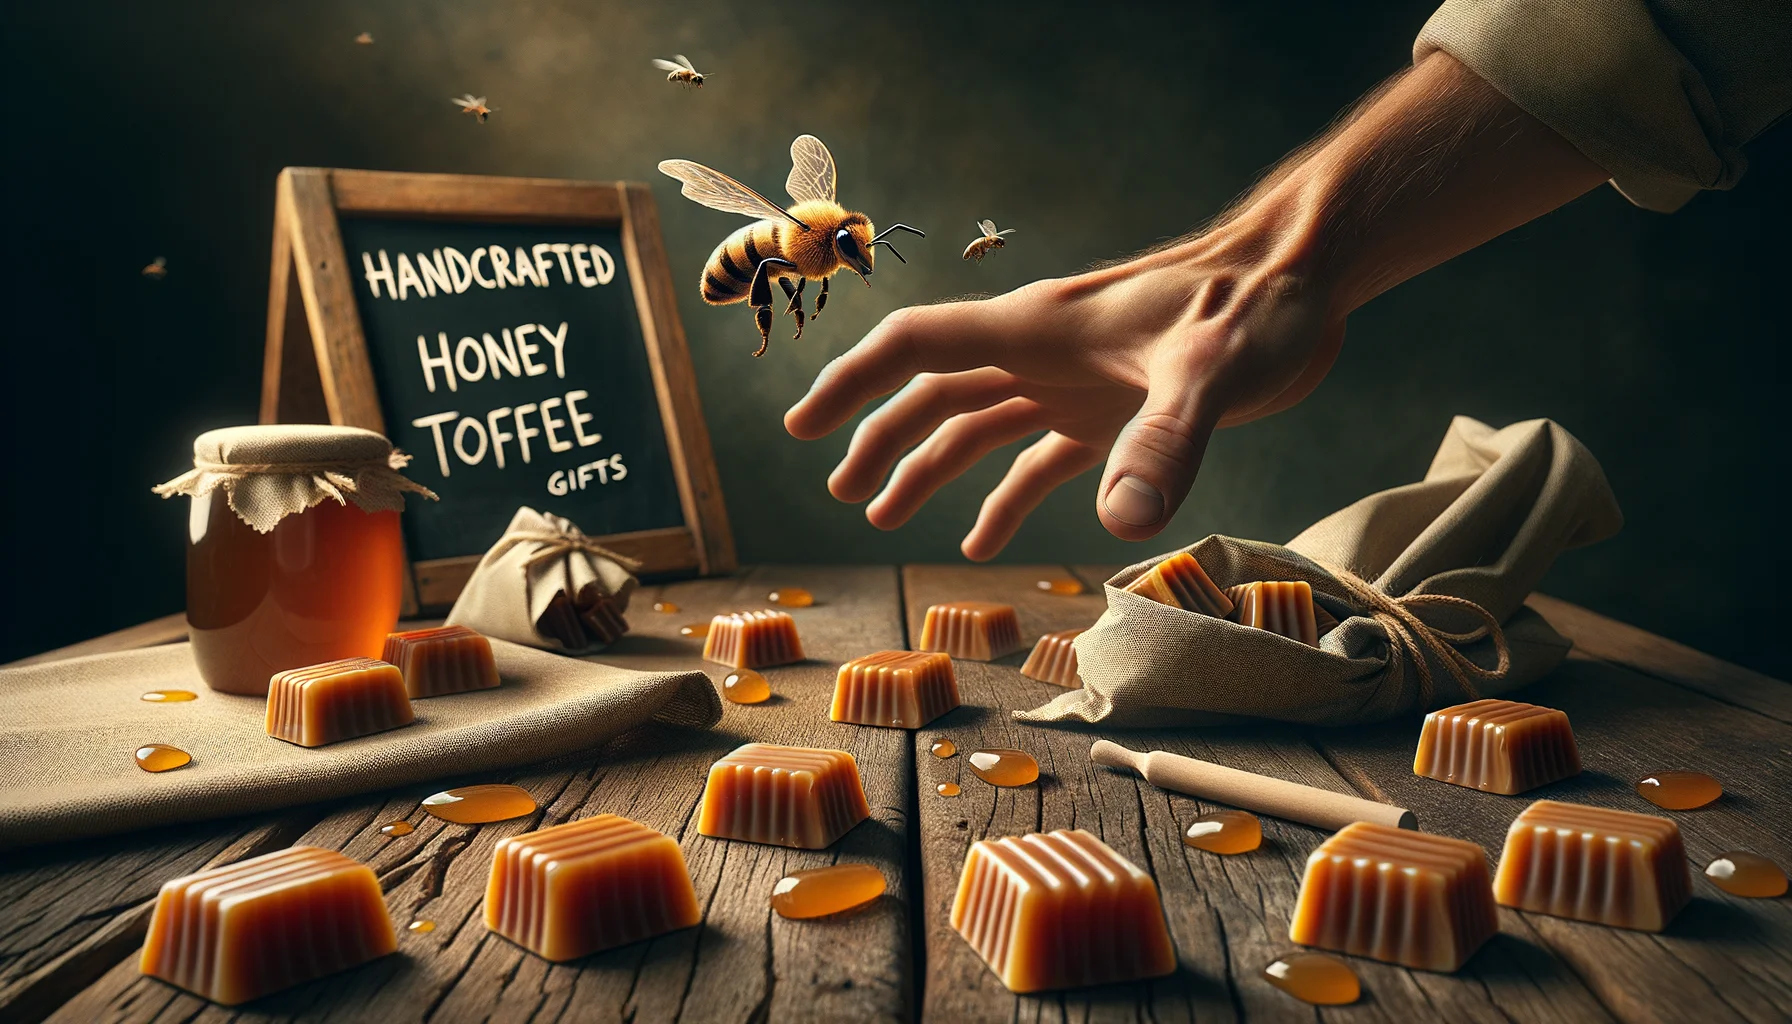 Imagine a humorous and realistic situation that perfectly highlights Handcrafted Honey Toffee Gifts. Picture a rustic wooden table, strewn with toffee wrappers, amber-colored honey toffee pieces gleaming under warm lighting. A masculine hand, possibly of Caucasian descent, is reaching out to grab a piece of toffee, but a bee, attracted by the honey, buzzes across the frame, momentarily distracting him. There's a chalkboard sign at the corner with 'Handcrafted Honey Toffee' written in elegant, cursive script. The image has a pleasant, earthy color palette, conveying a sense of warmth and homeliness.